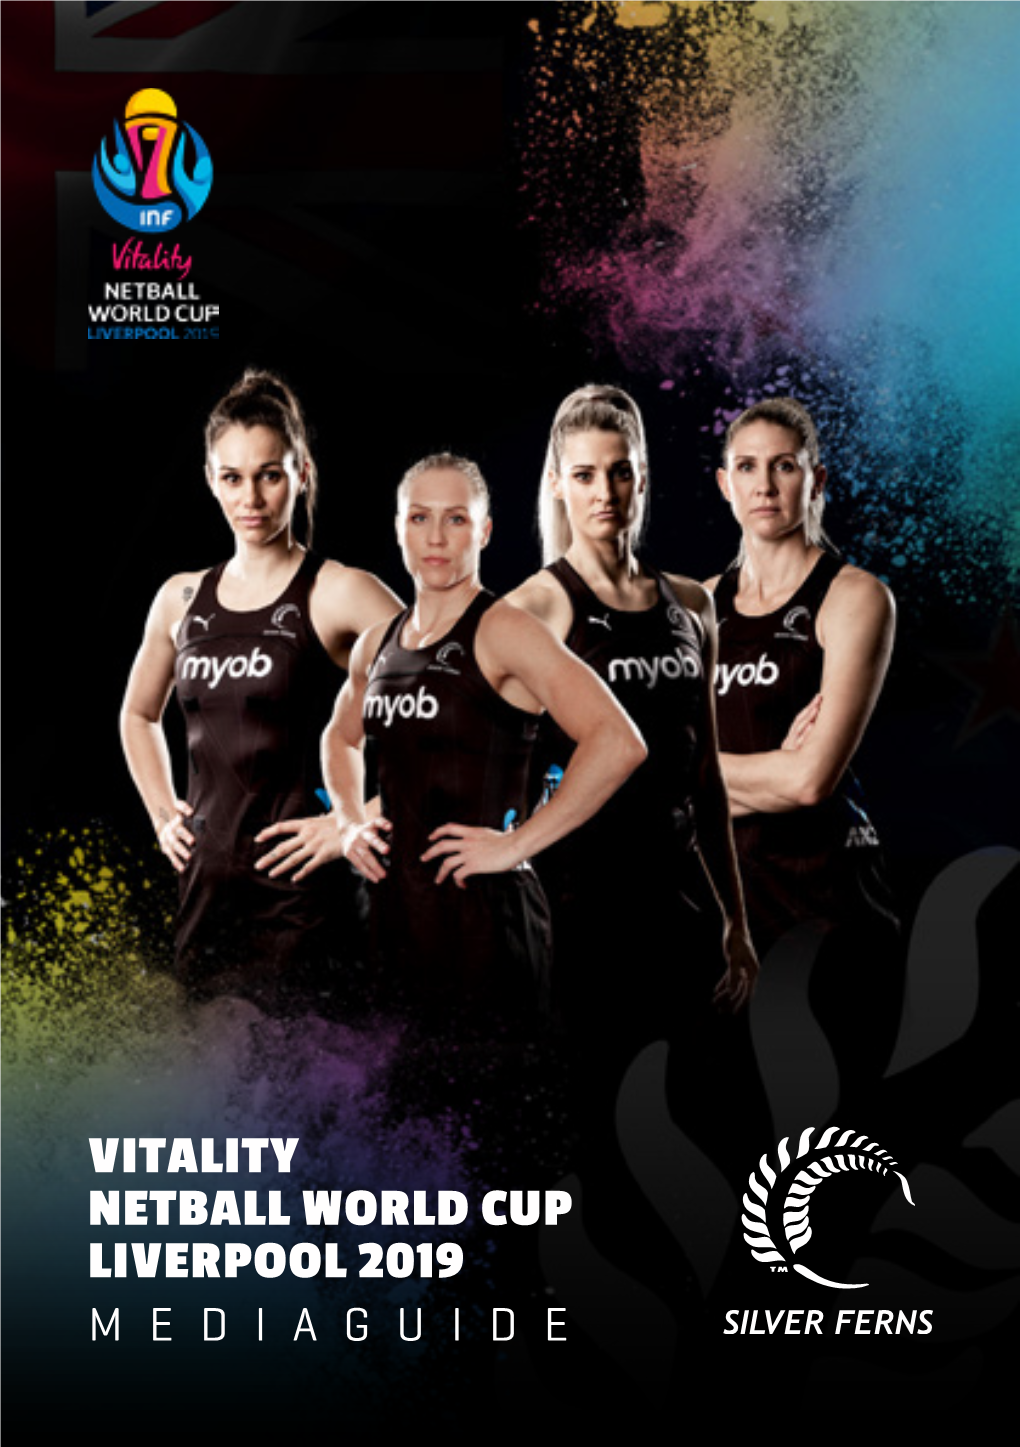 Silver Ferns Vitality Netball World Cup Liverpool Media Guide 2019 July 2019